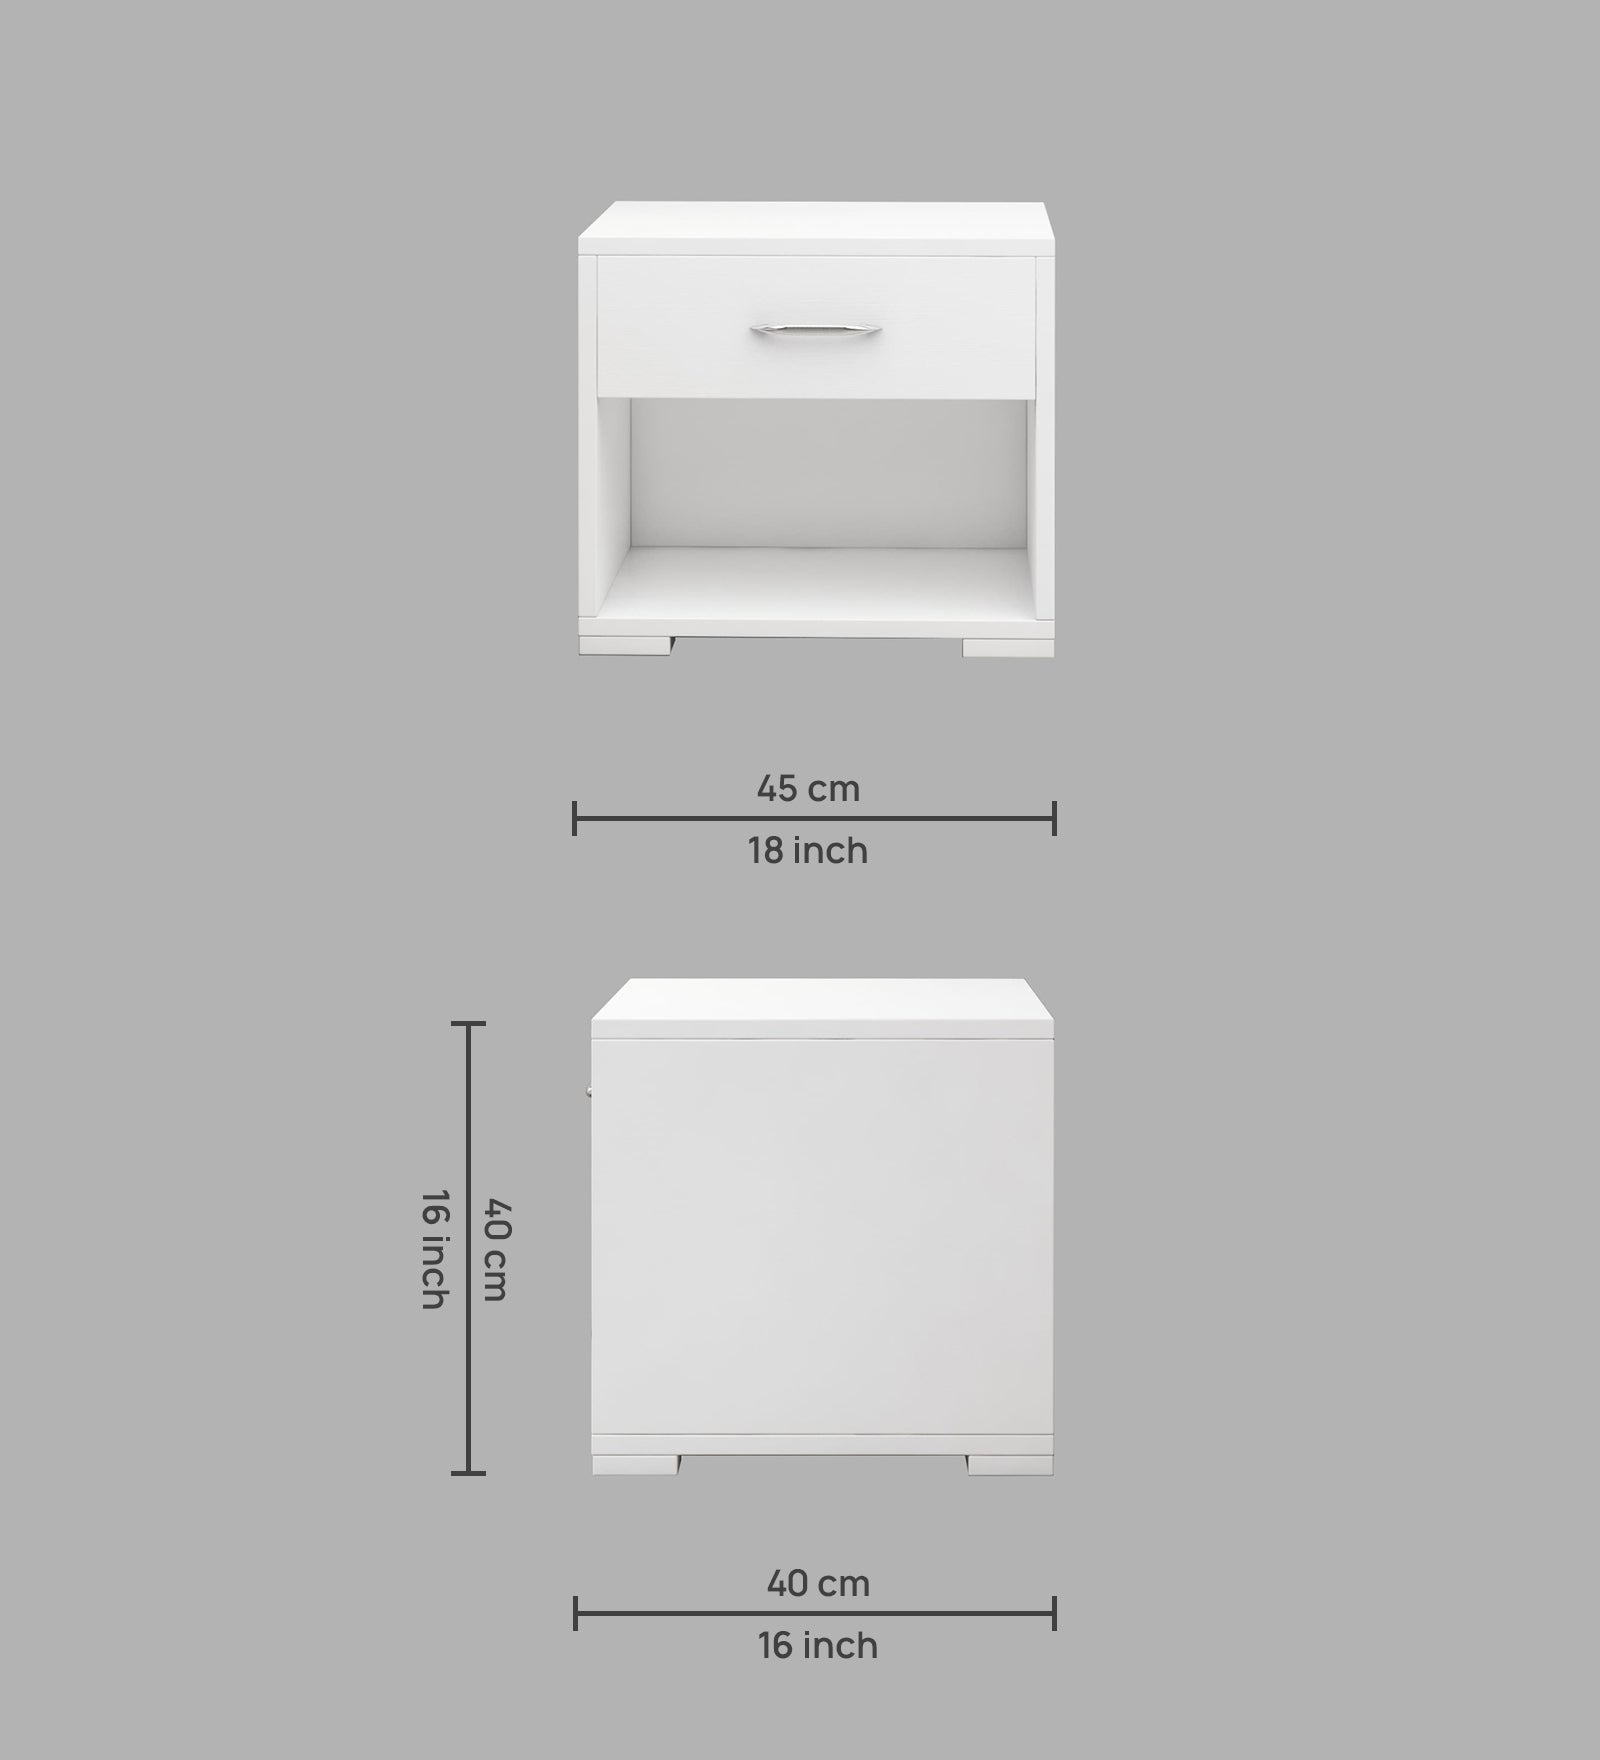 Kona Bedside Table With Drawer in Frosty White Finish